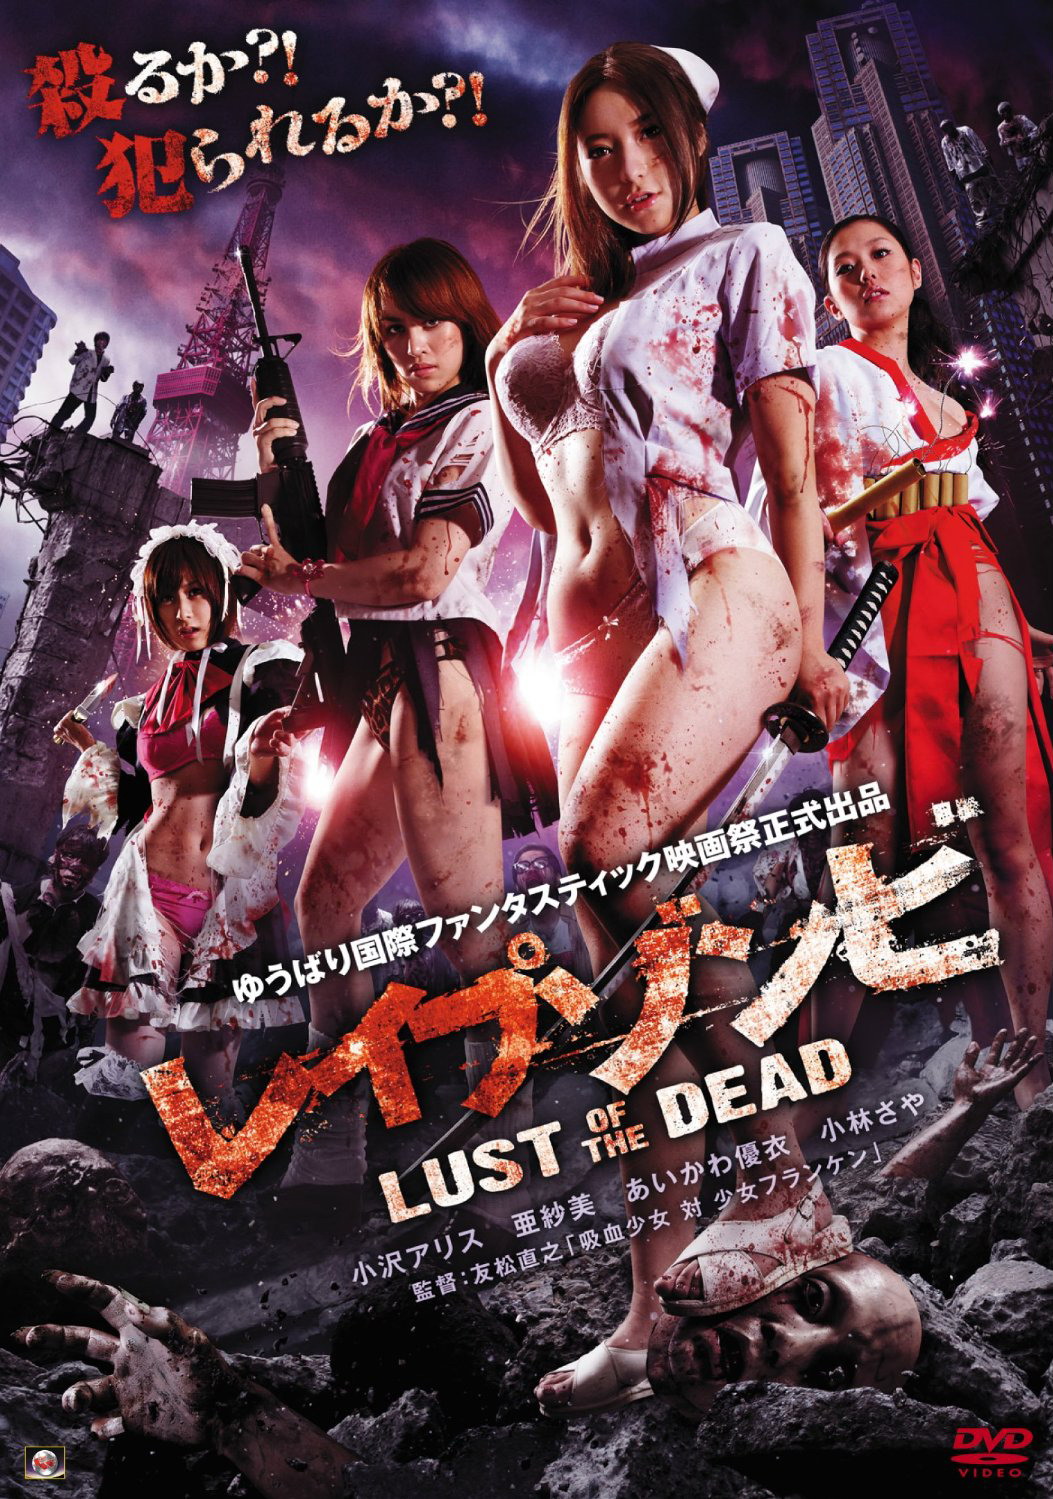 Film Review: Rape Zombie: Lust of the Dead (2012) | HNN